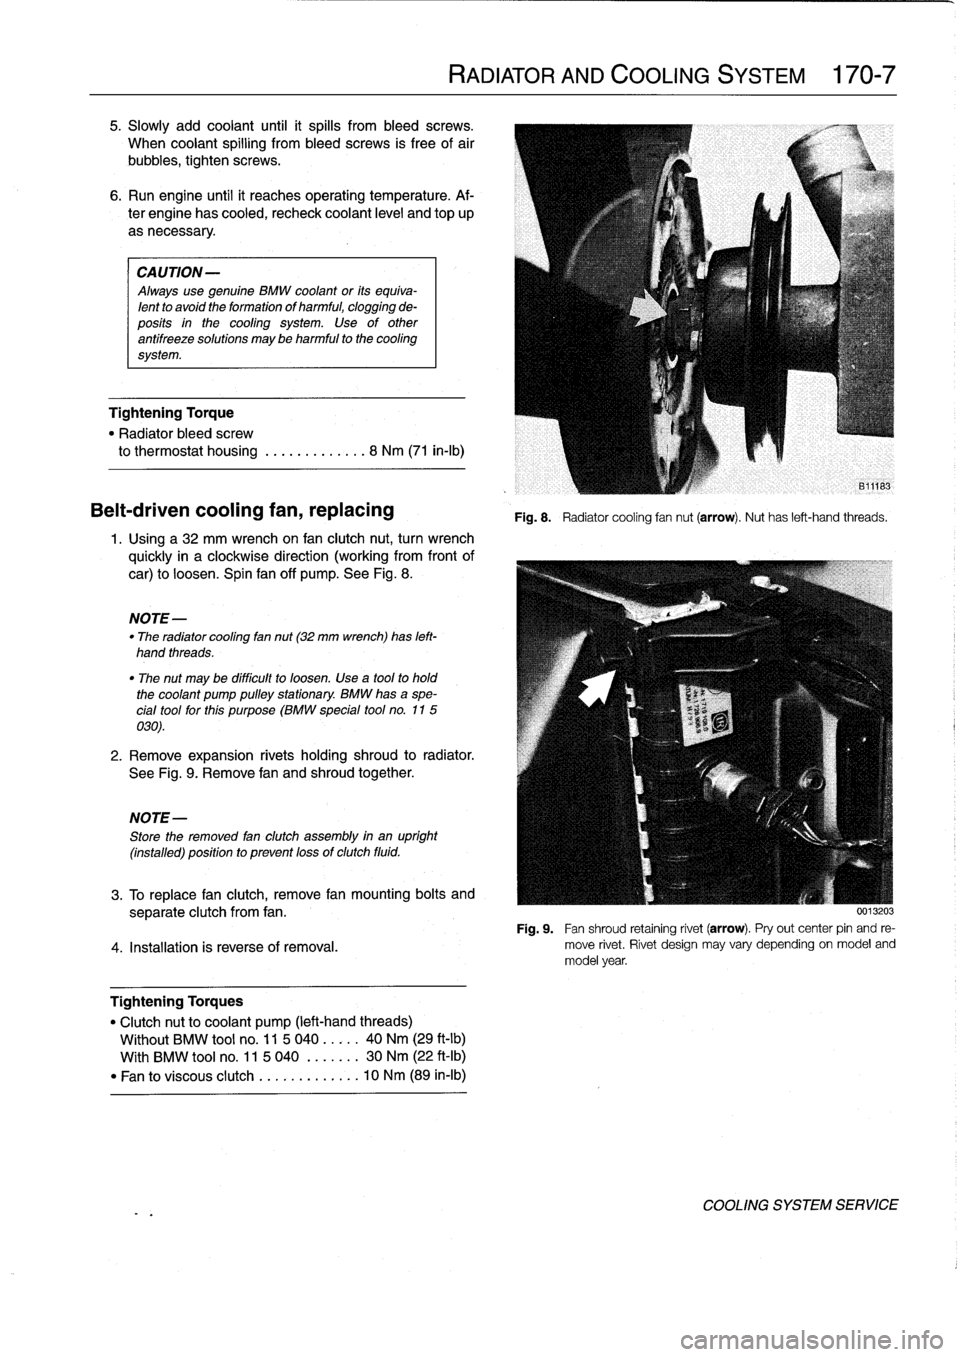 BMW 318i 1996 E36 Workshop Manual 5
.
Slowly
add
coolant
until
it
spills
from
bleed
screws
.

When
coolant
spillíng
from
bleed
screws
is
free
of
air

bubbies,
tighten
screws
.

6
.
Run
engine
until
it
reaches
operatíng
temperature
.